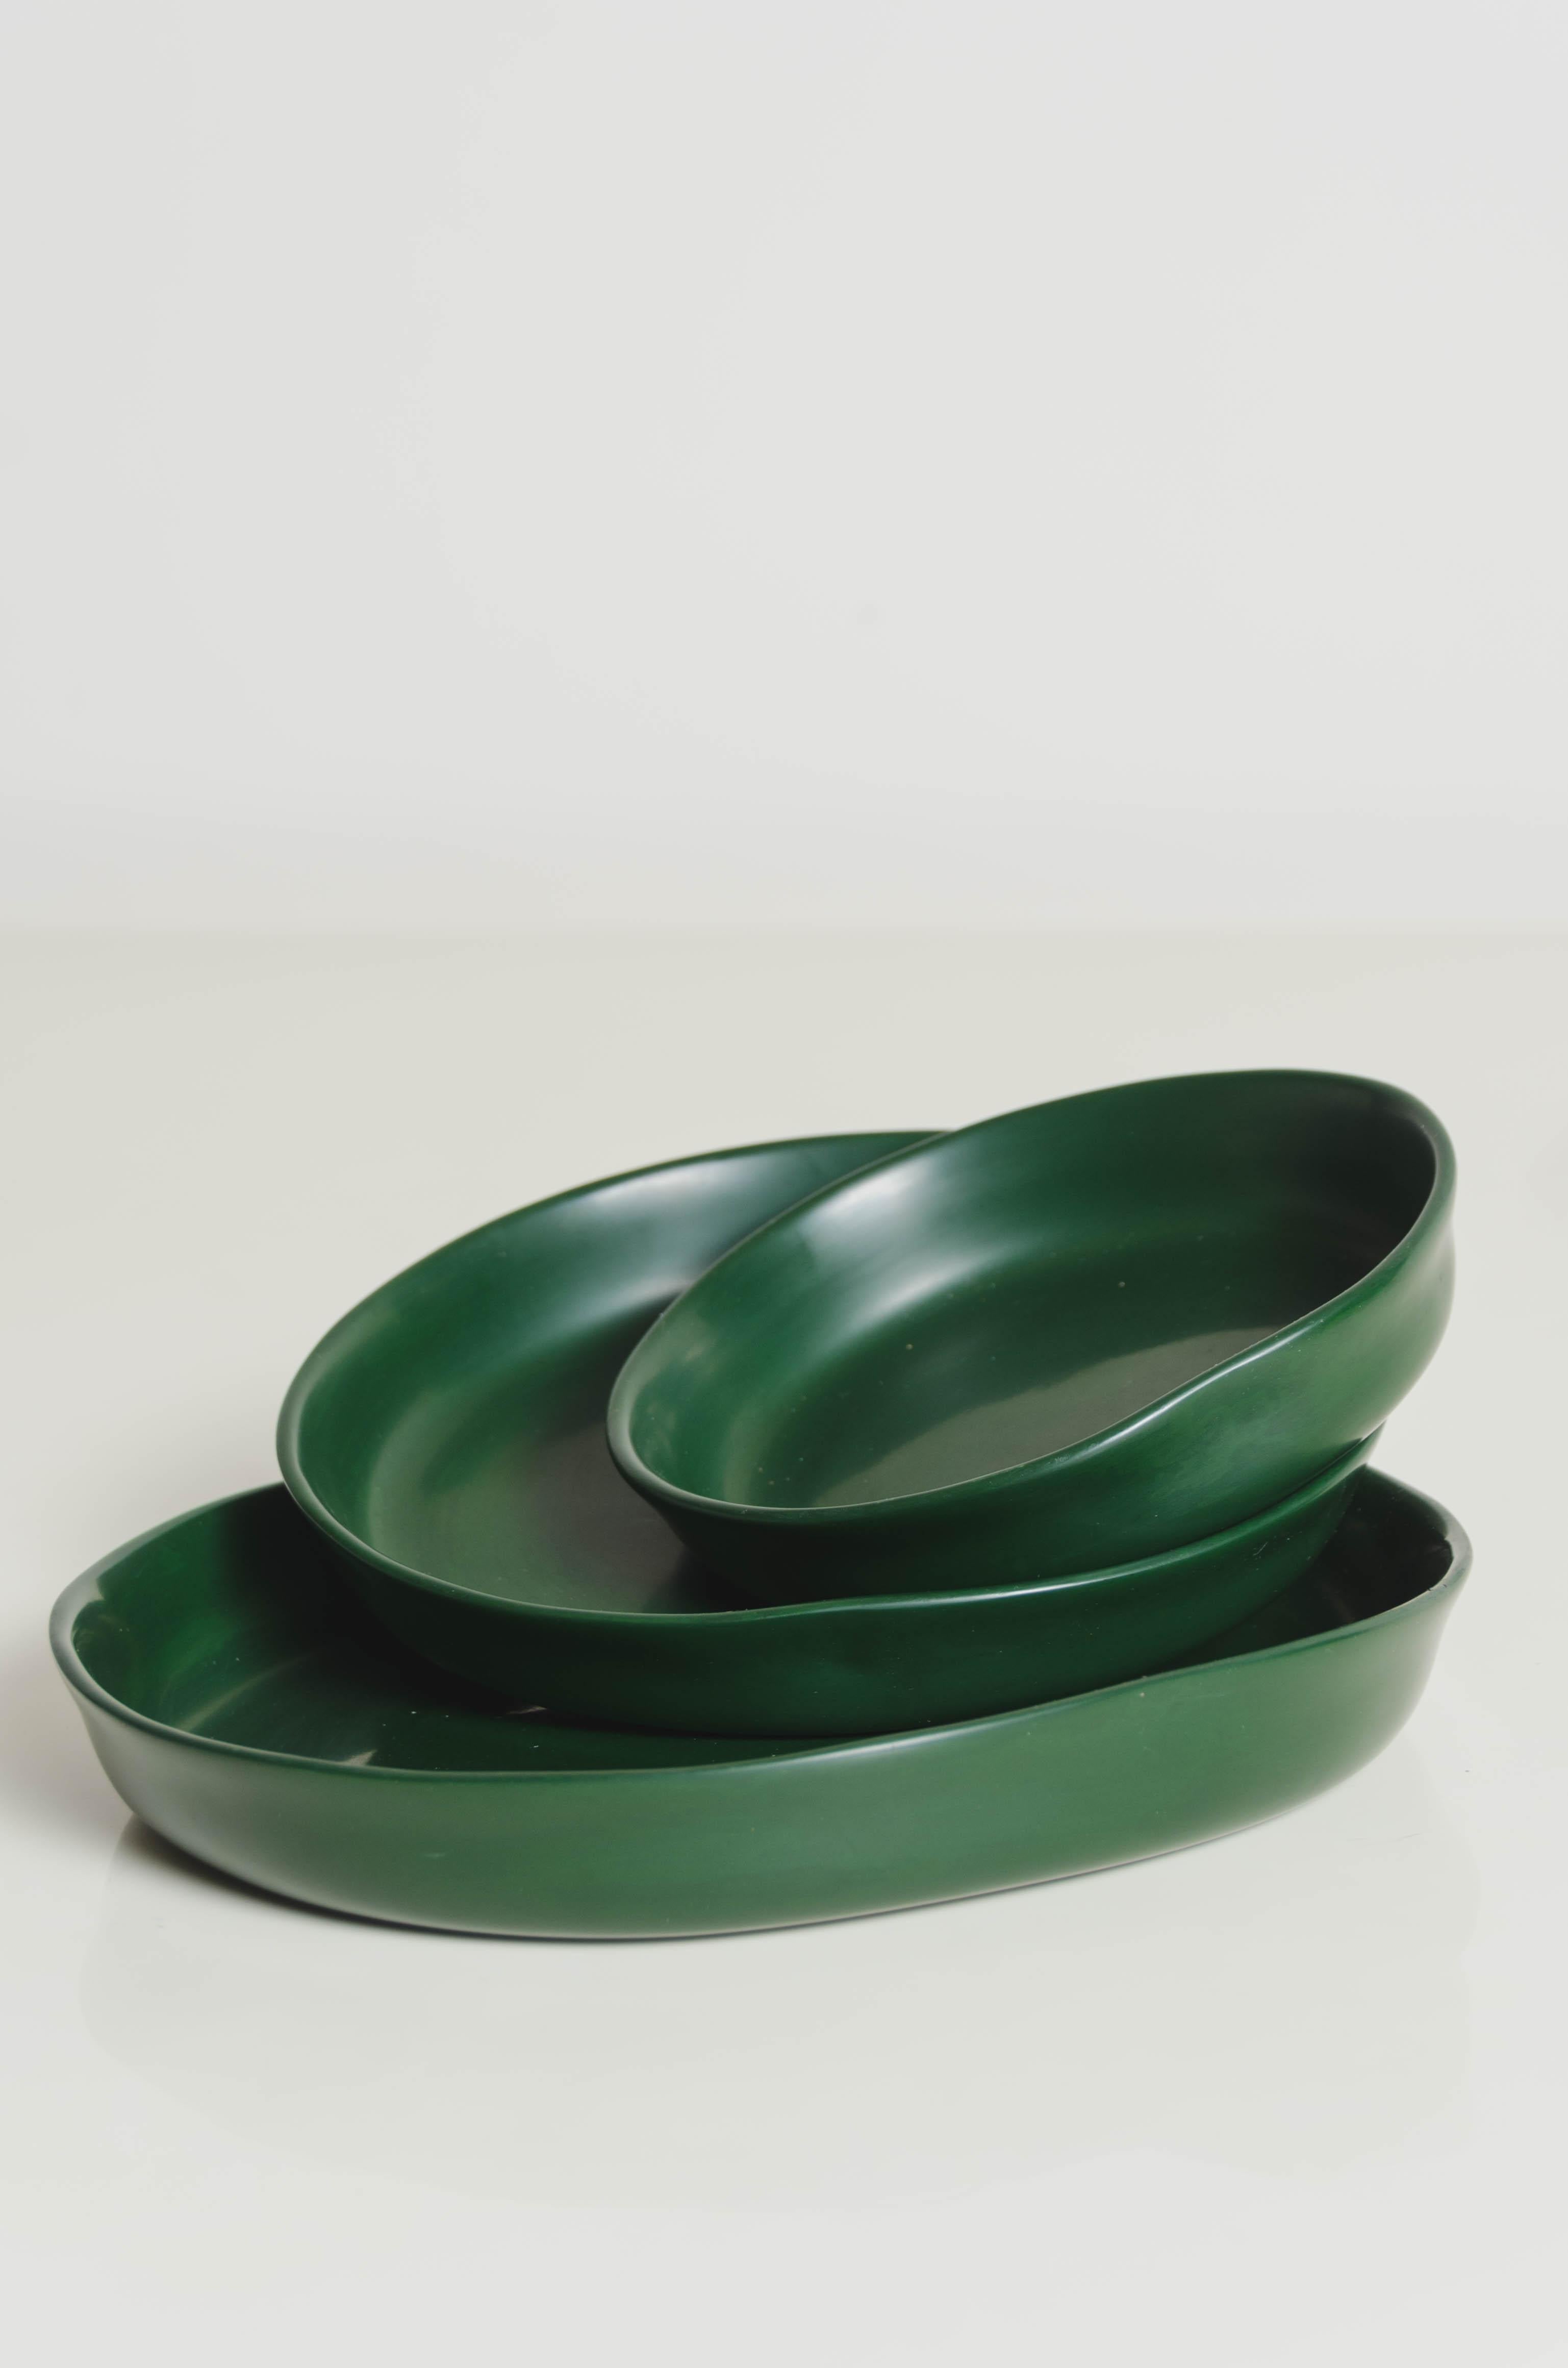 Round Plates, Set of 3, Green Lacquer by Robert Kuo, Handmade, Limited Edition For Sale 3